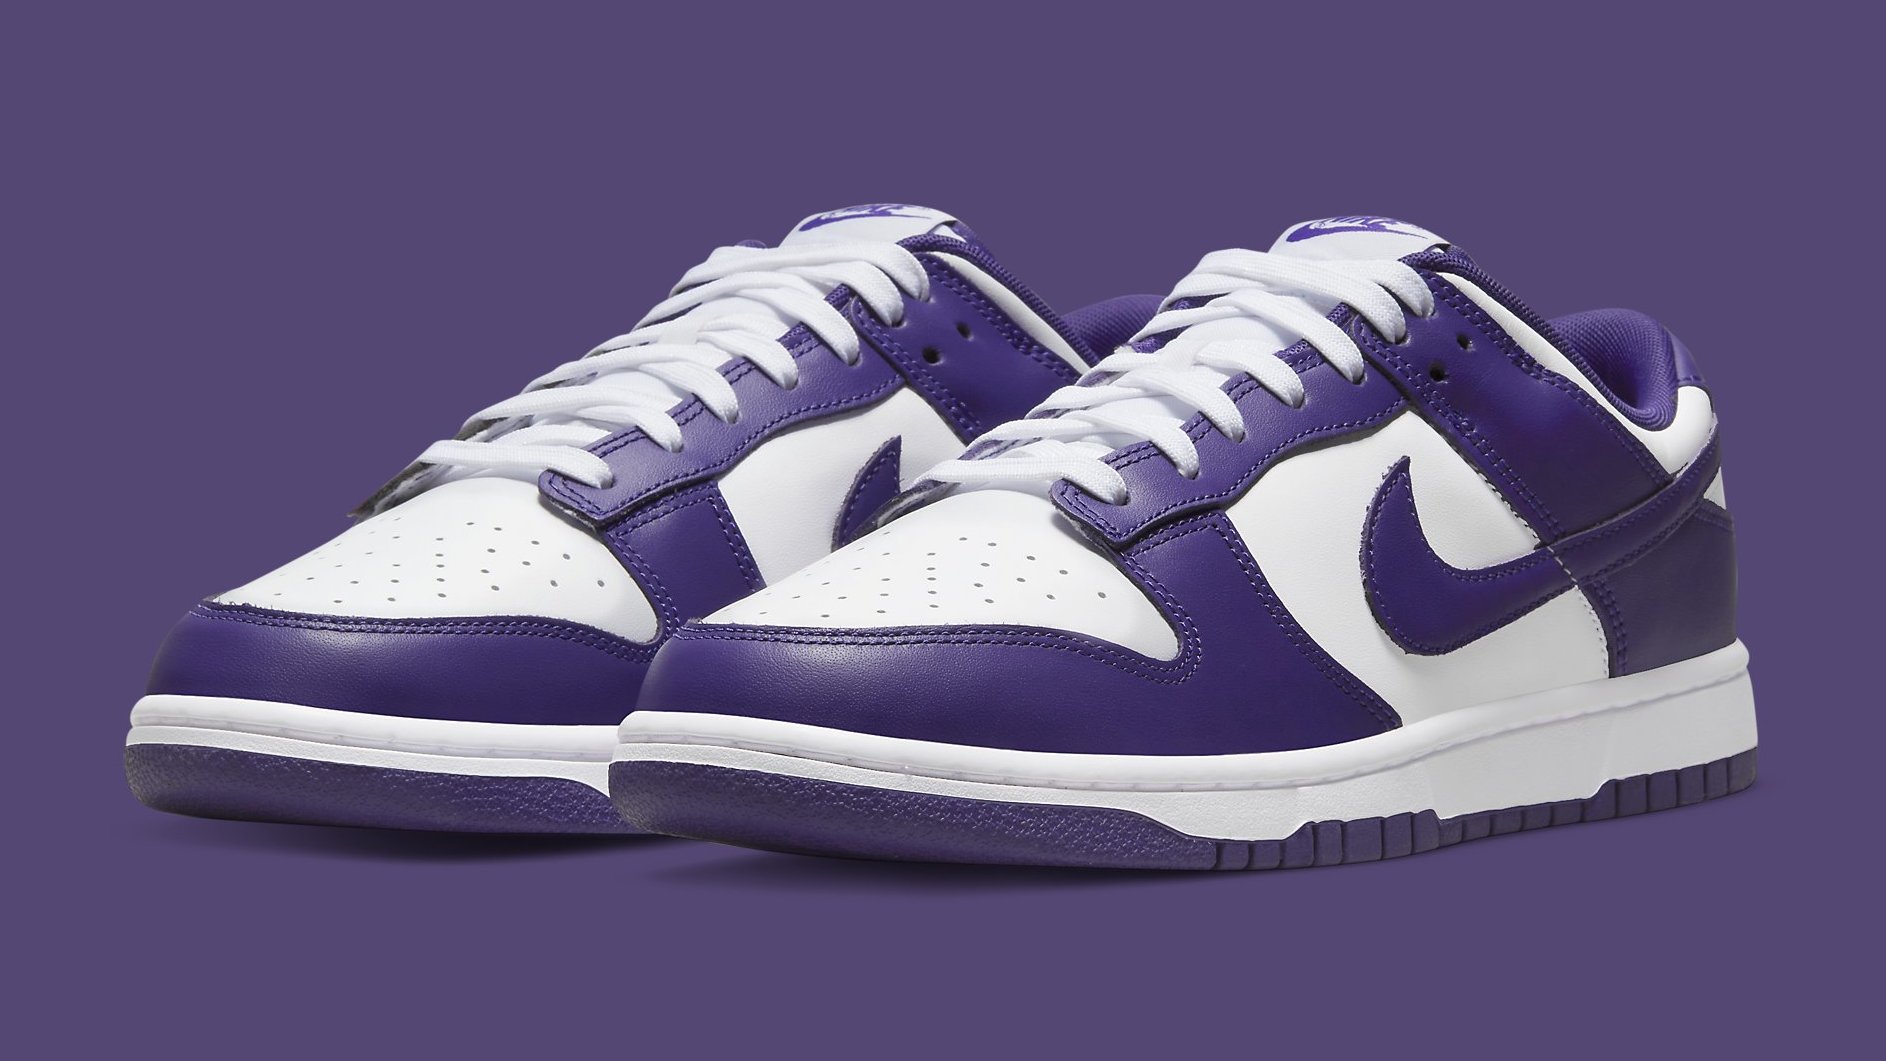 Championship Court Purple' Nike Dunk Lows Get an Official